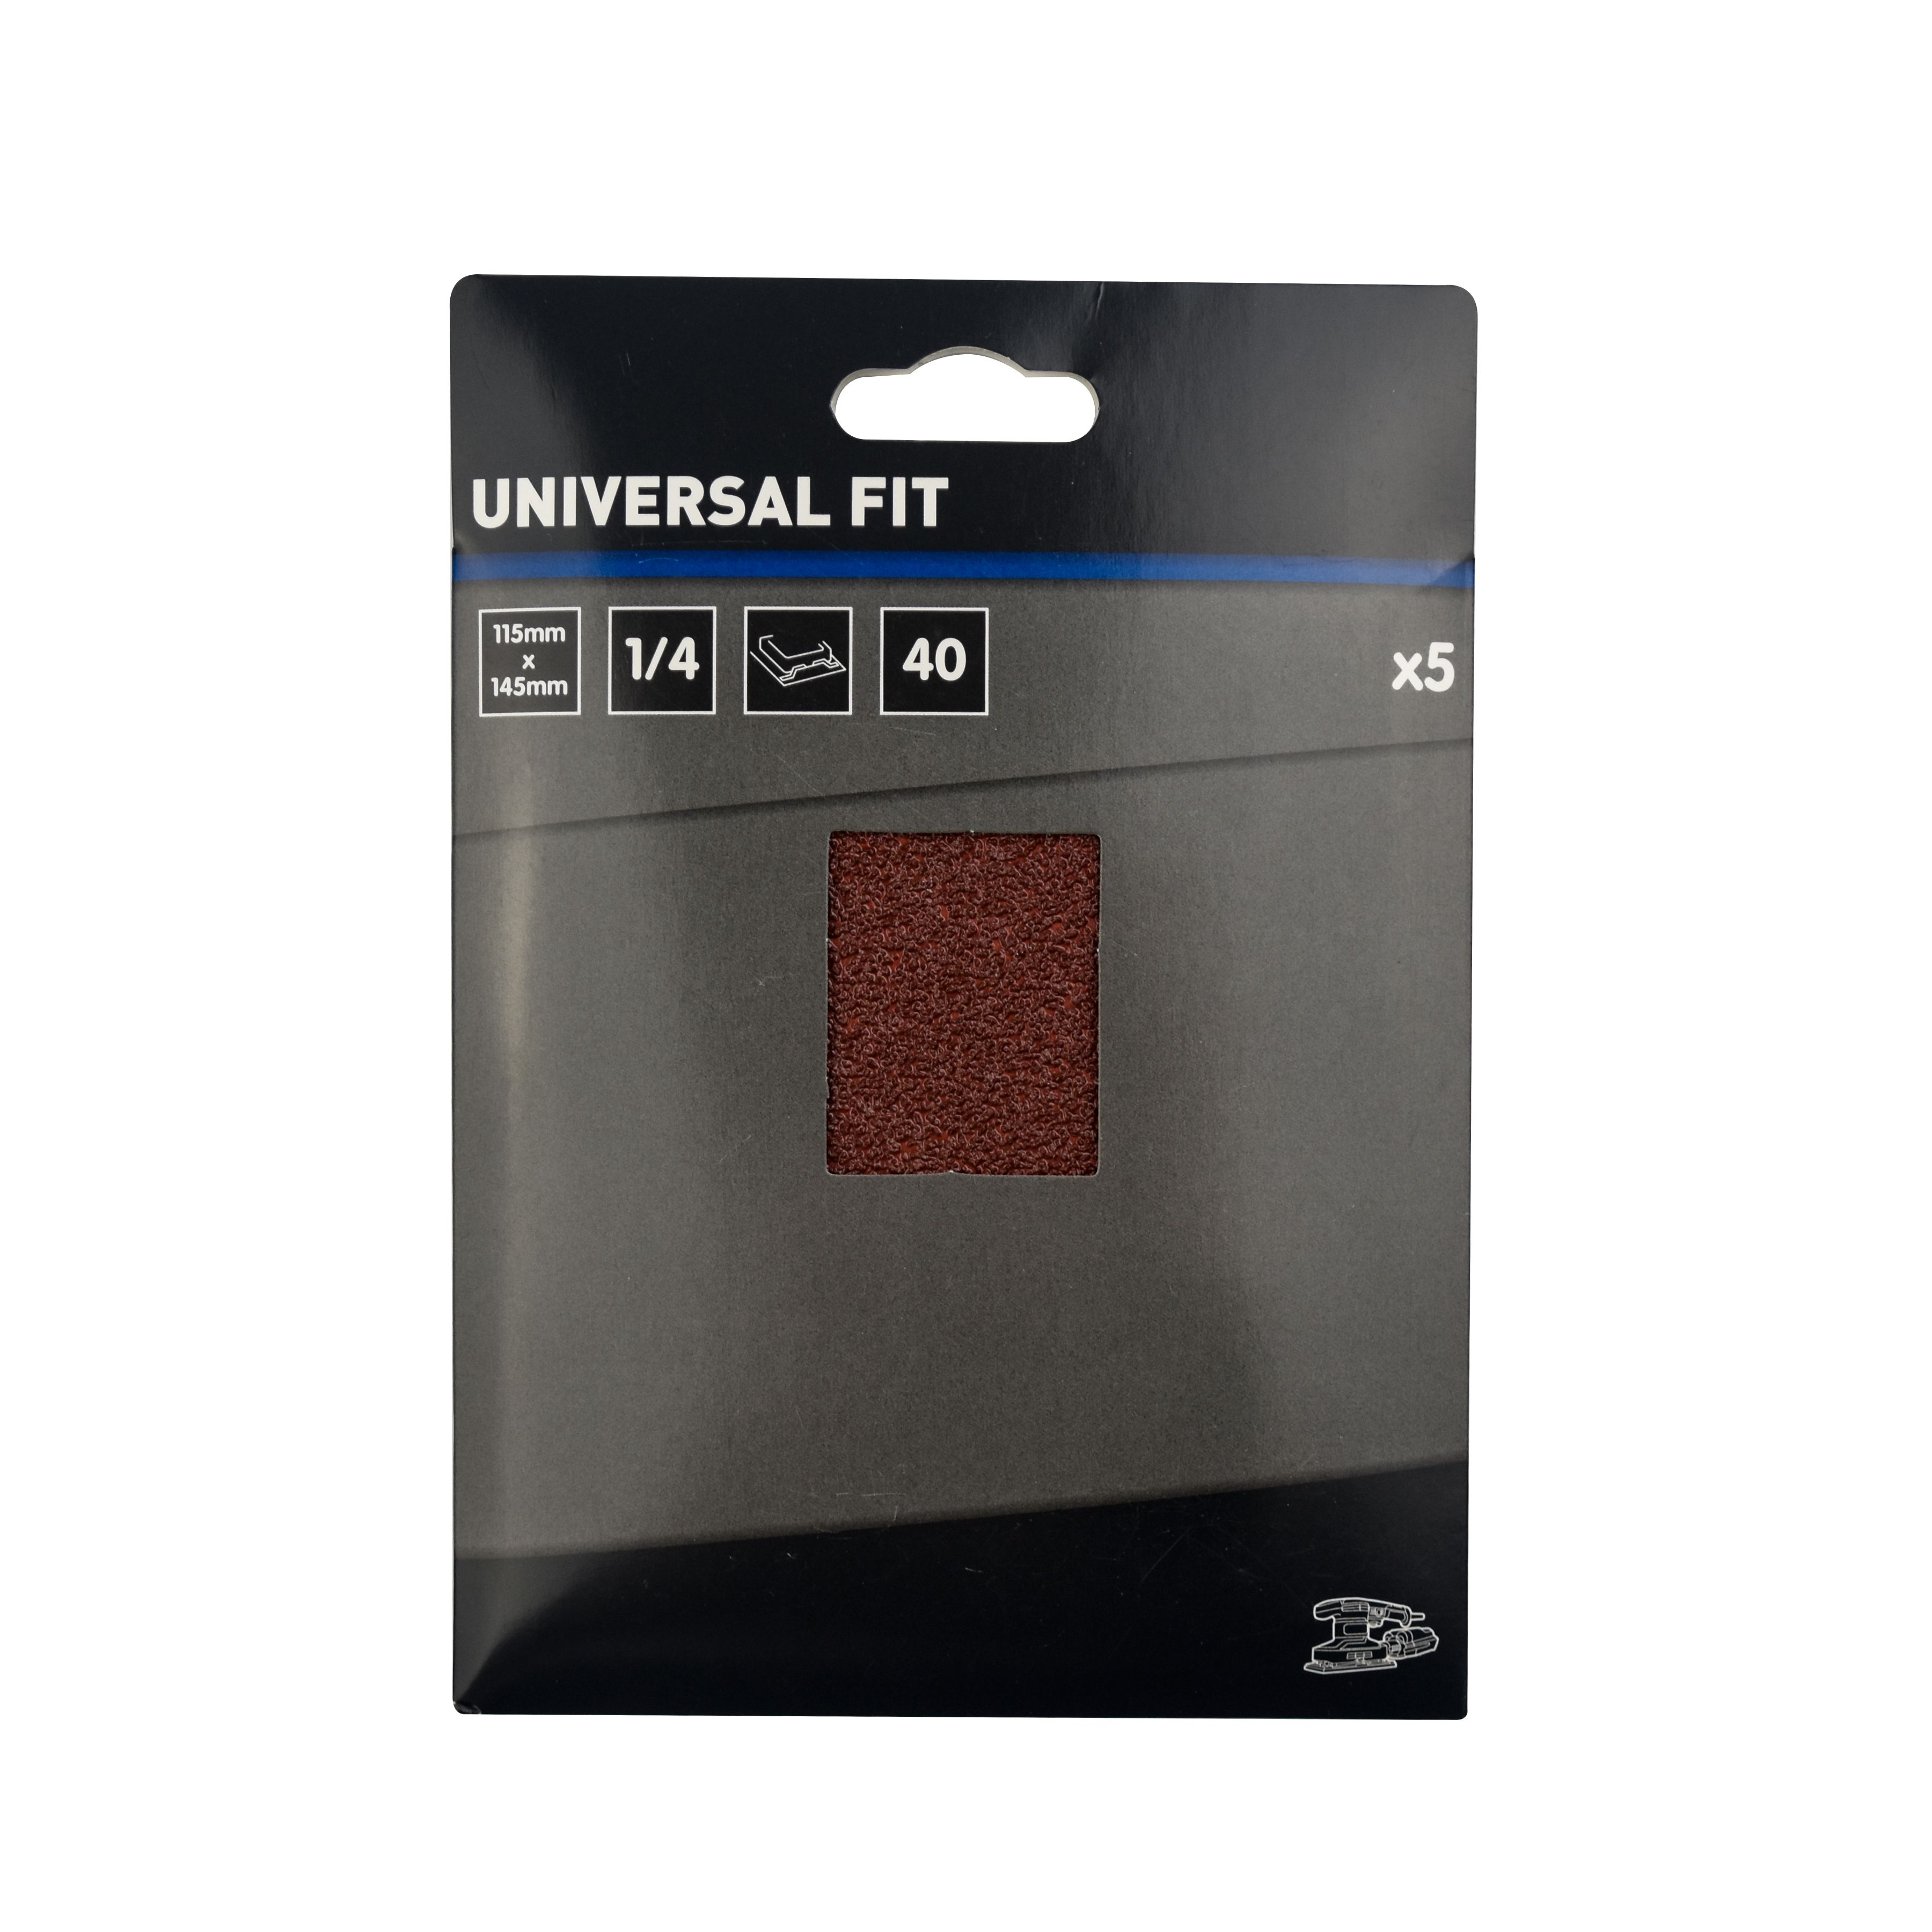 Universal Fit 40 grit Red 1/4 sanding sheet (L)145mm (W)115mm, Pack of 5